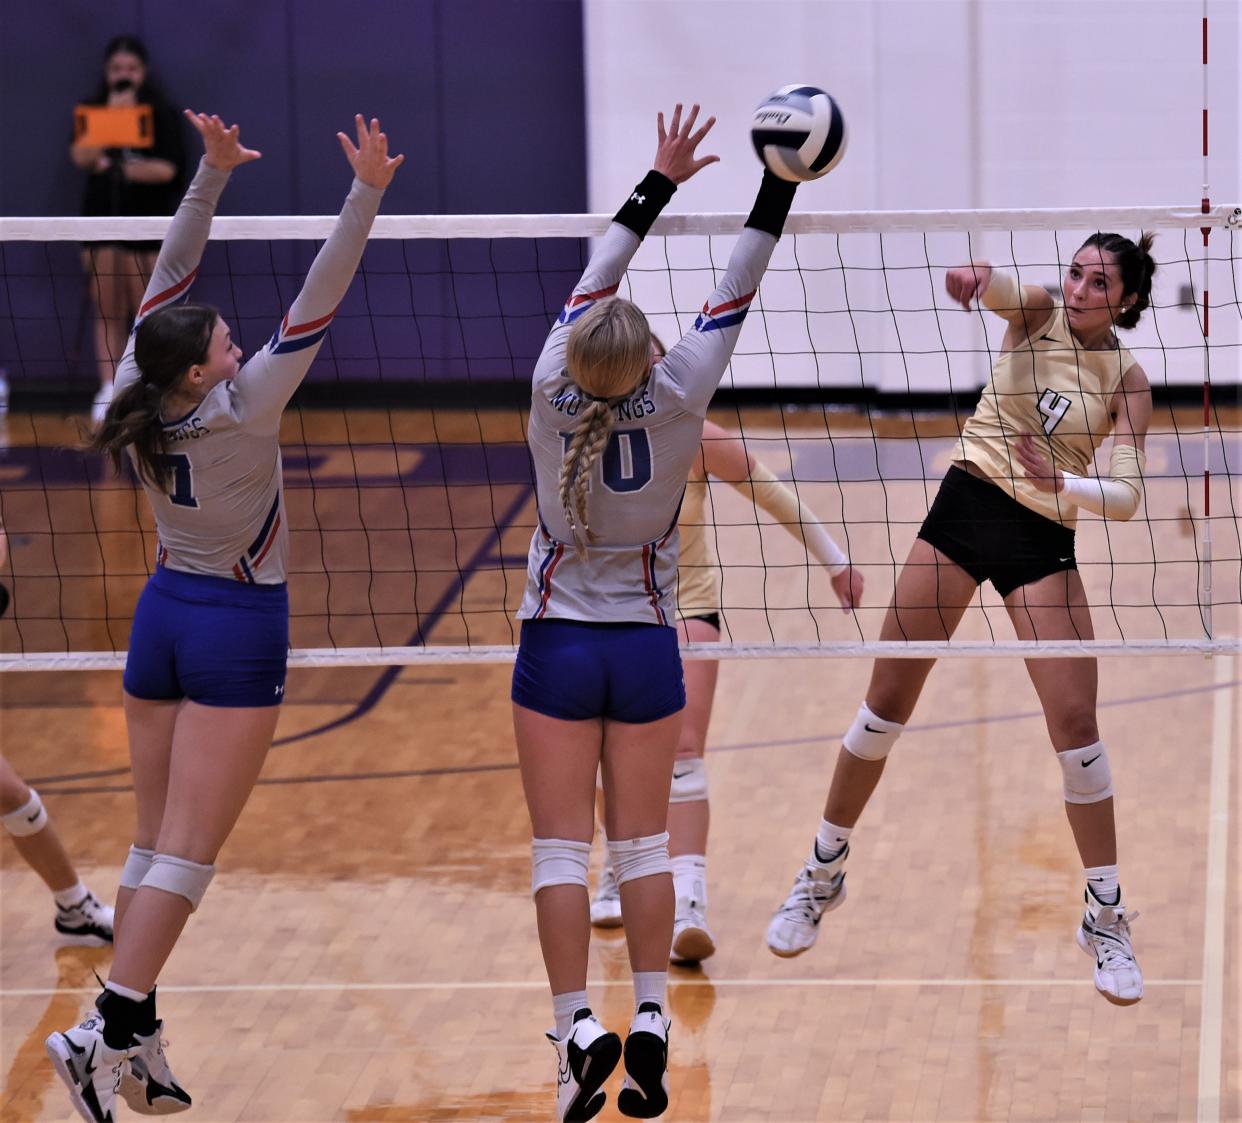 Clyde's Aven Horn, right, watches her shot as Midland Christian's Camdyn Sears (10) and Addi Tatsch defend. Midland Christian beat Clyde 29-27, 27-29, 25-18, 25-20 in the non-district match Aug. 29 at Wylie's Bulldog Gym in Abilene.